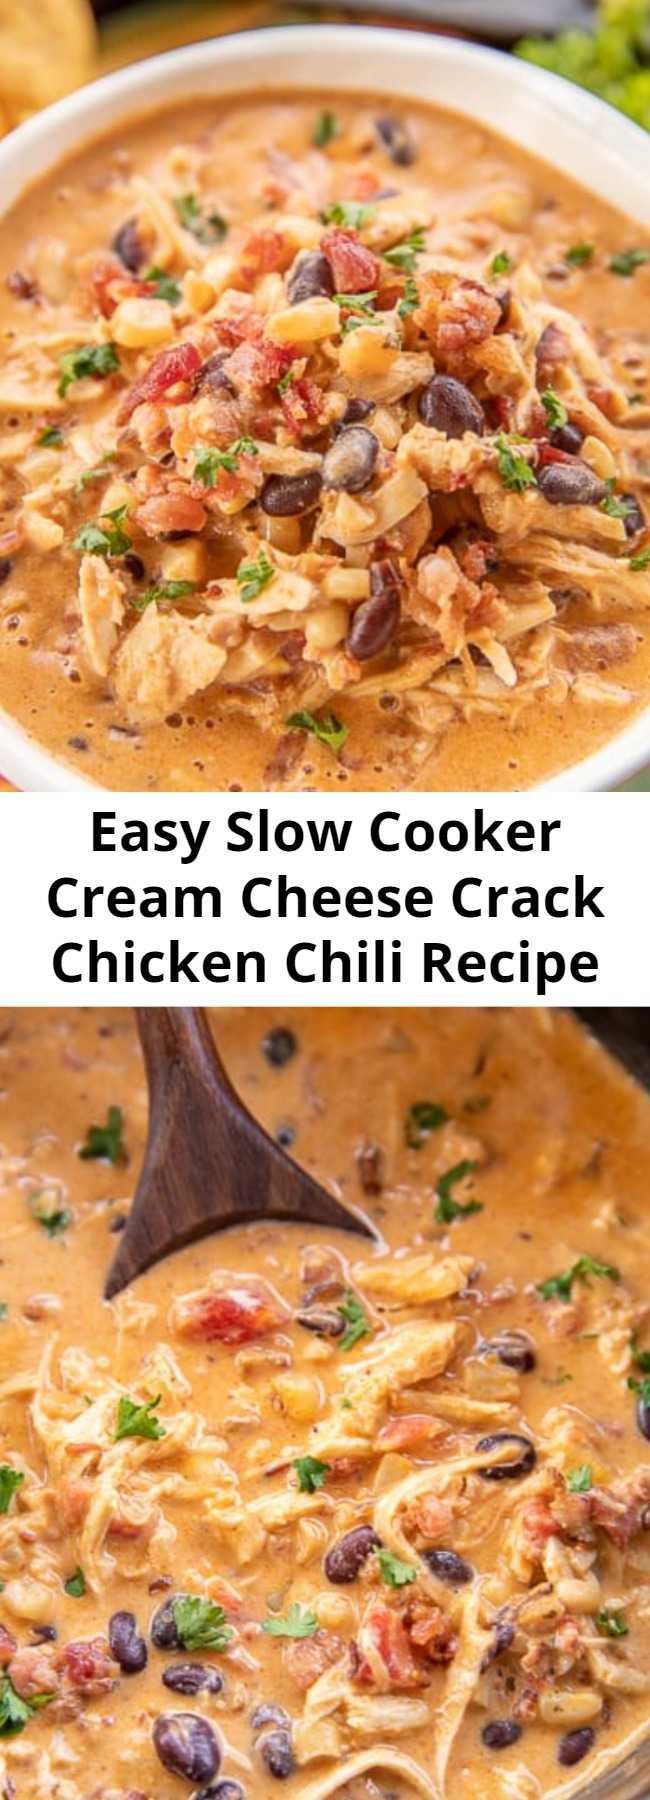 Easy Slow Cooker Cream Cheese Crack Chicken Chili Recipe - this stuff is AMAZING! We’ve made it 3 times this month! We can’t get enough of it!!! Chicken, corn, black beans, chicken broth, diced tomatoes and green chiles, cumin, chili powder, onion, ranch seasoning, bacon and cheddar cheese. We served the chili with some cornbread and Fritos. PERFECT! This is already on the menu again this weekend! YUM! #crockpot #slowcooker #chili #chickenchili